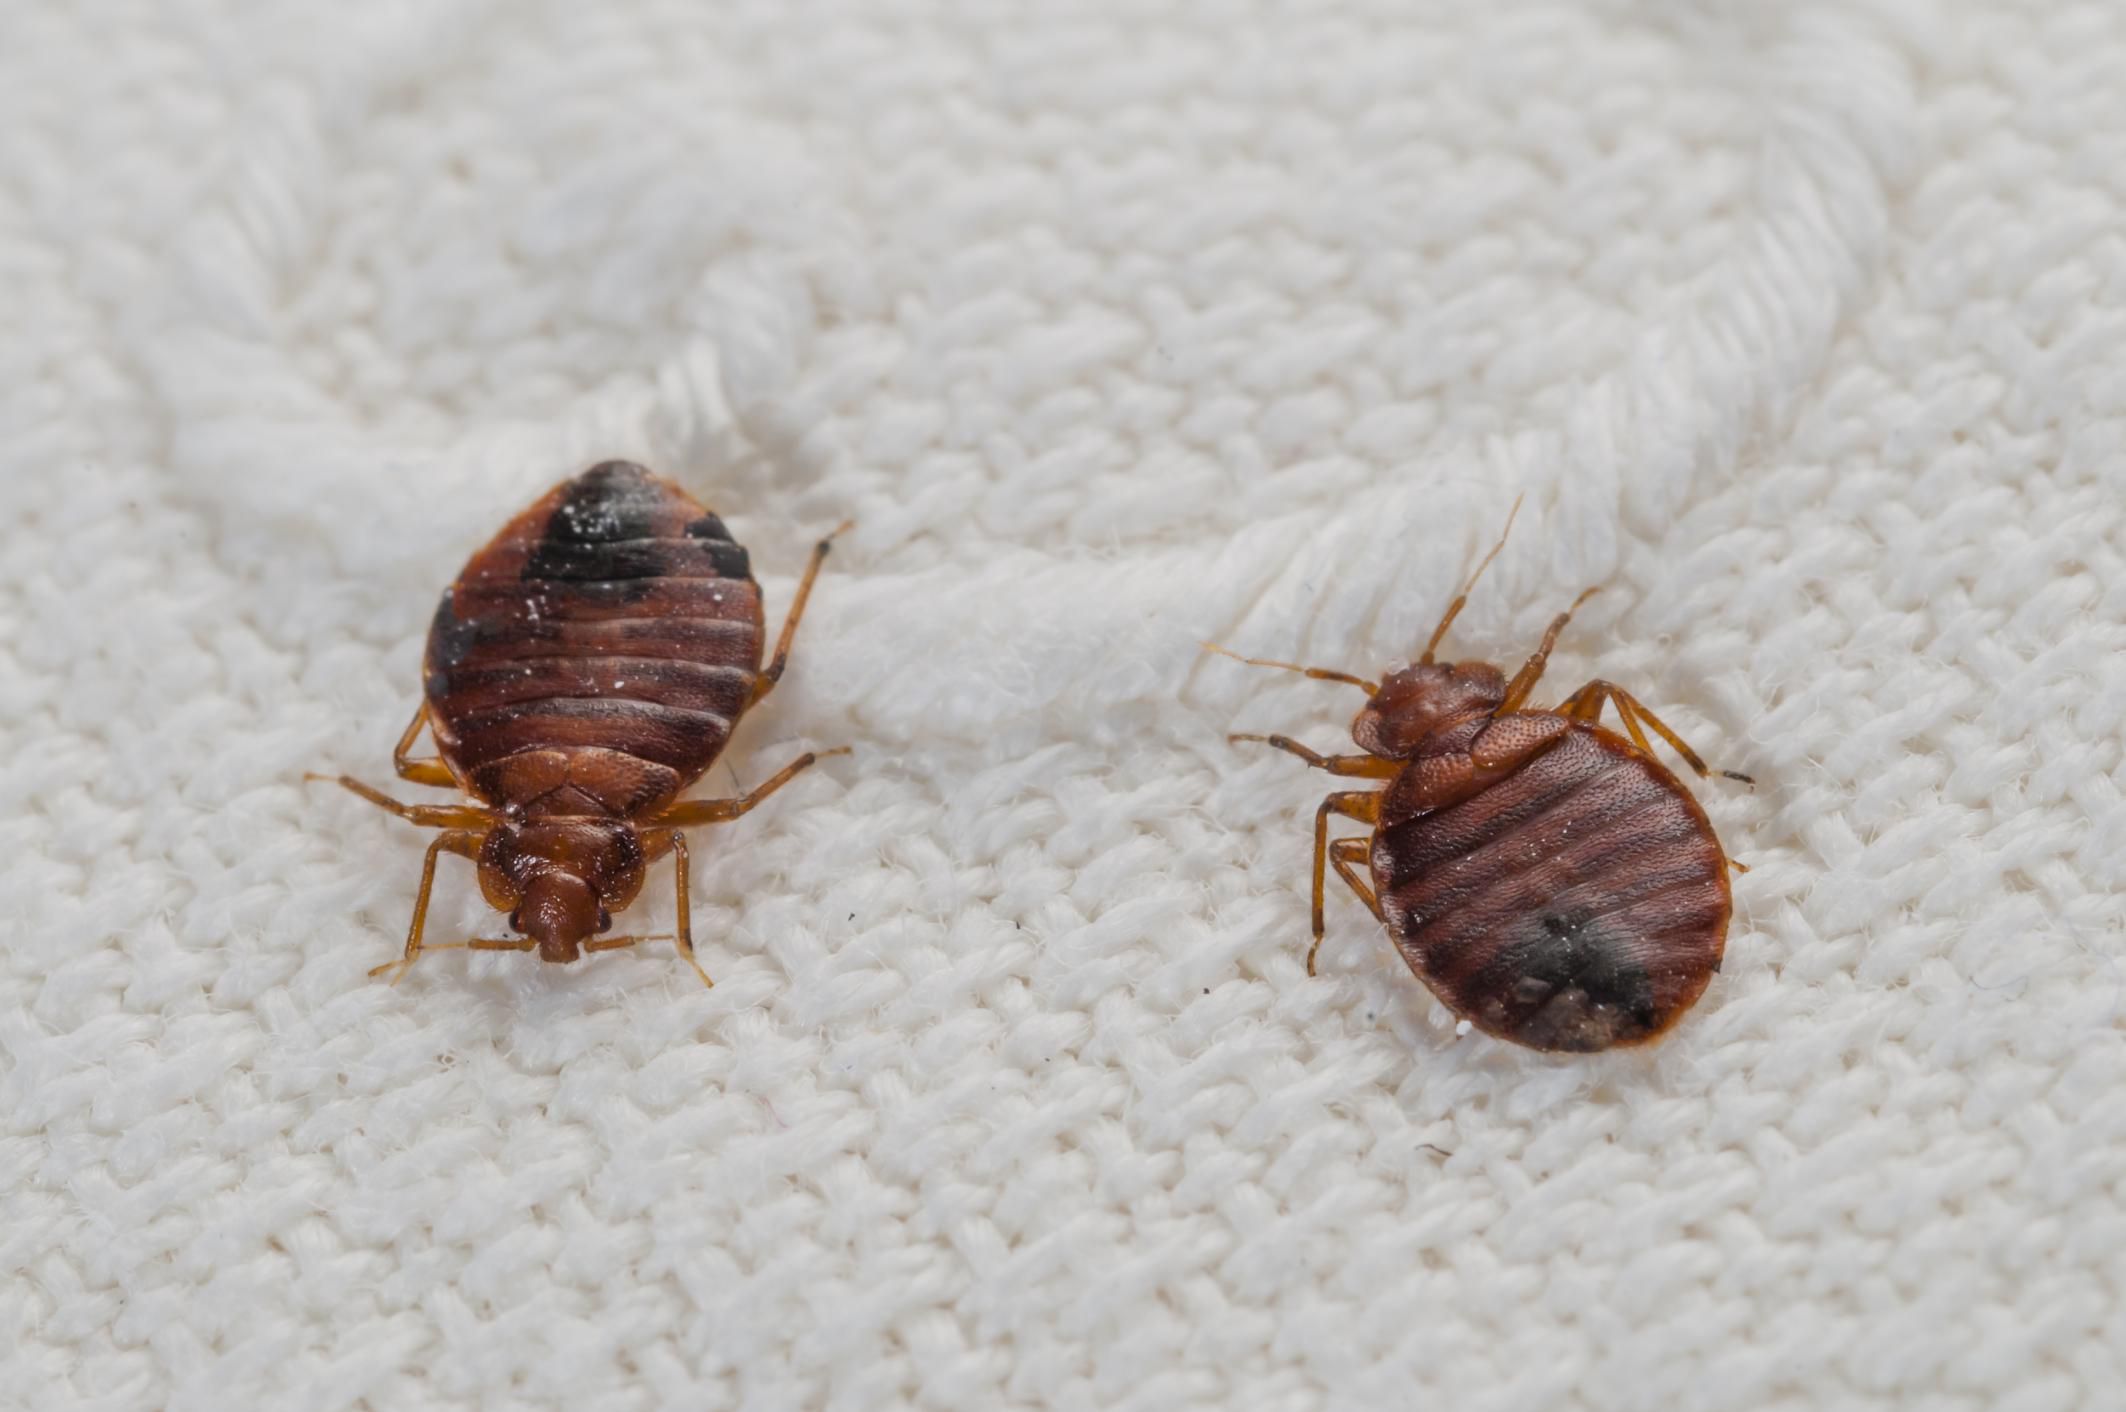 Ways of Getting Rid of Bed Bugs in Your Furniture Start with Laundering Your Furniture